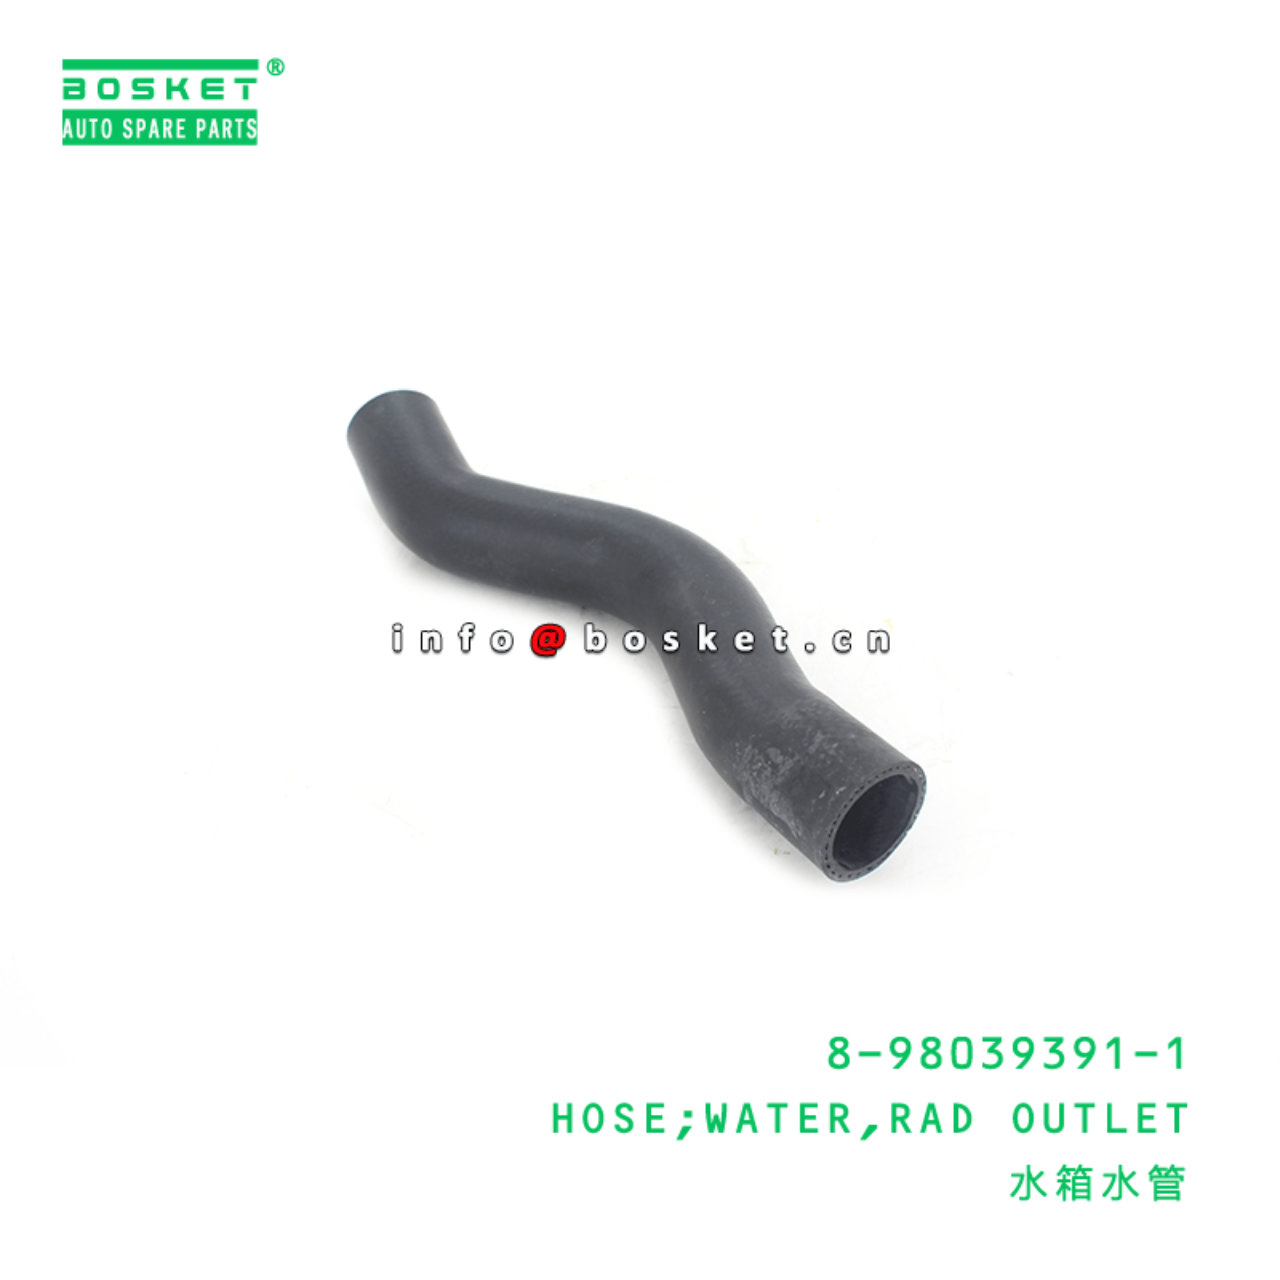 8-98039391-1 Radiator Outlet Water Hose 8980393911 Suitable for ISUZU NMR